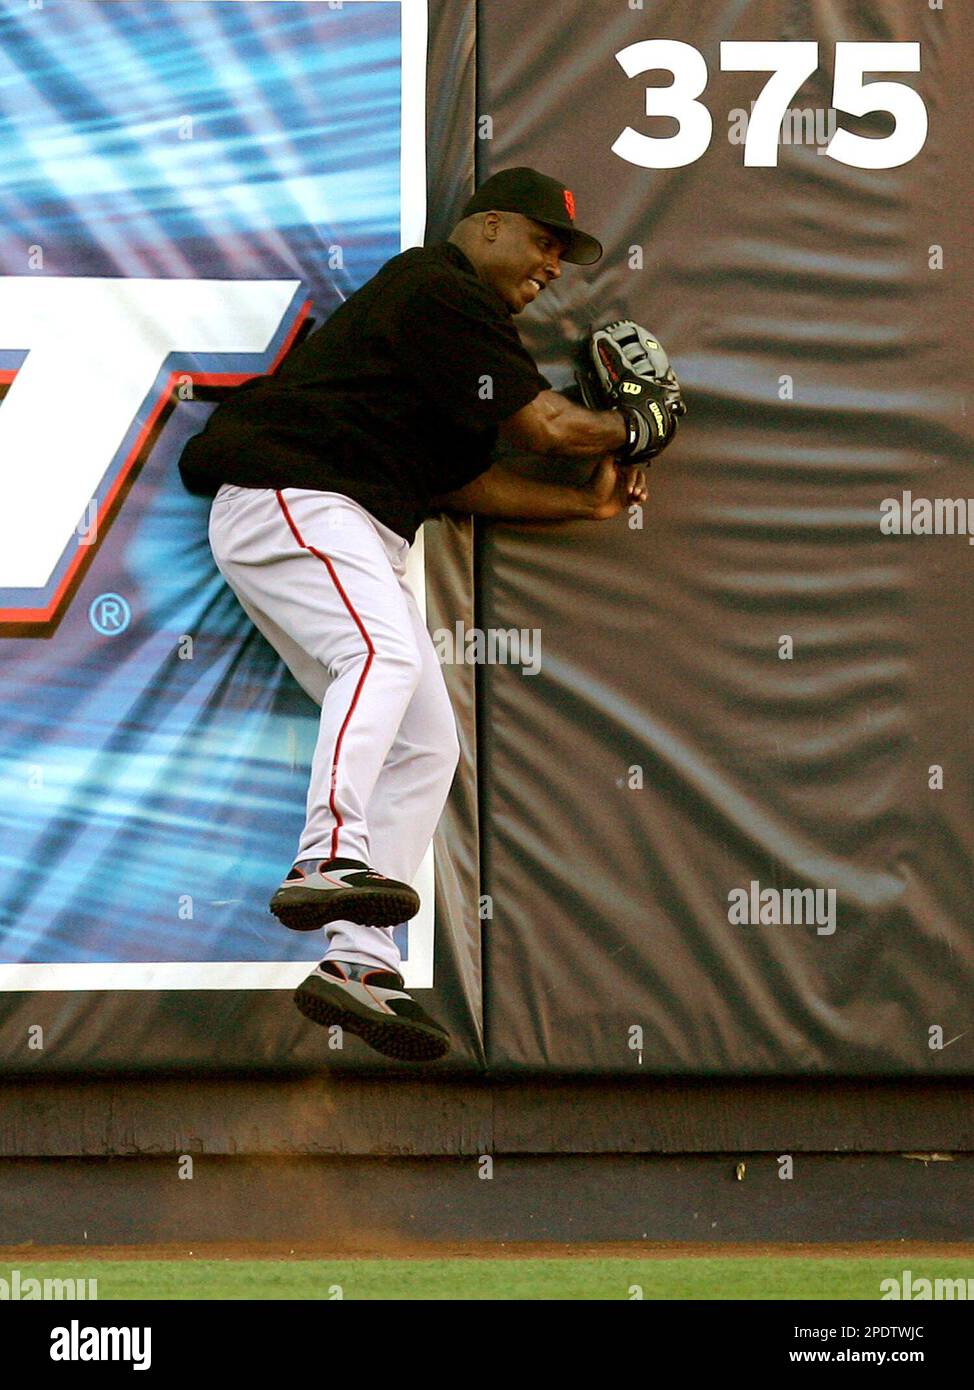 https://c8.alamy.com/comp/2PDTWJC/san-francisco-giants-barry-bonds-bumps-into-the-outfield-wall-while-shagging-fly-balls-during-batting-practice-before-their-game-with-the-los-angeles-dodgers-tuesday-sept-6-2005-in-los-angeles-ap-photochris-carlson-2PDTWJC.jpg